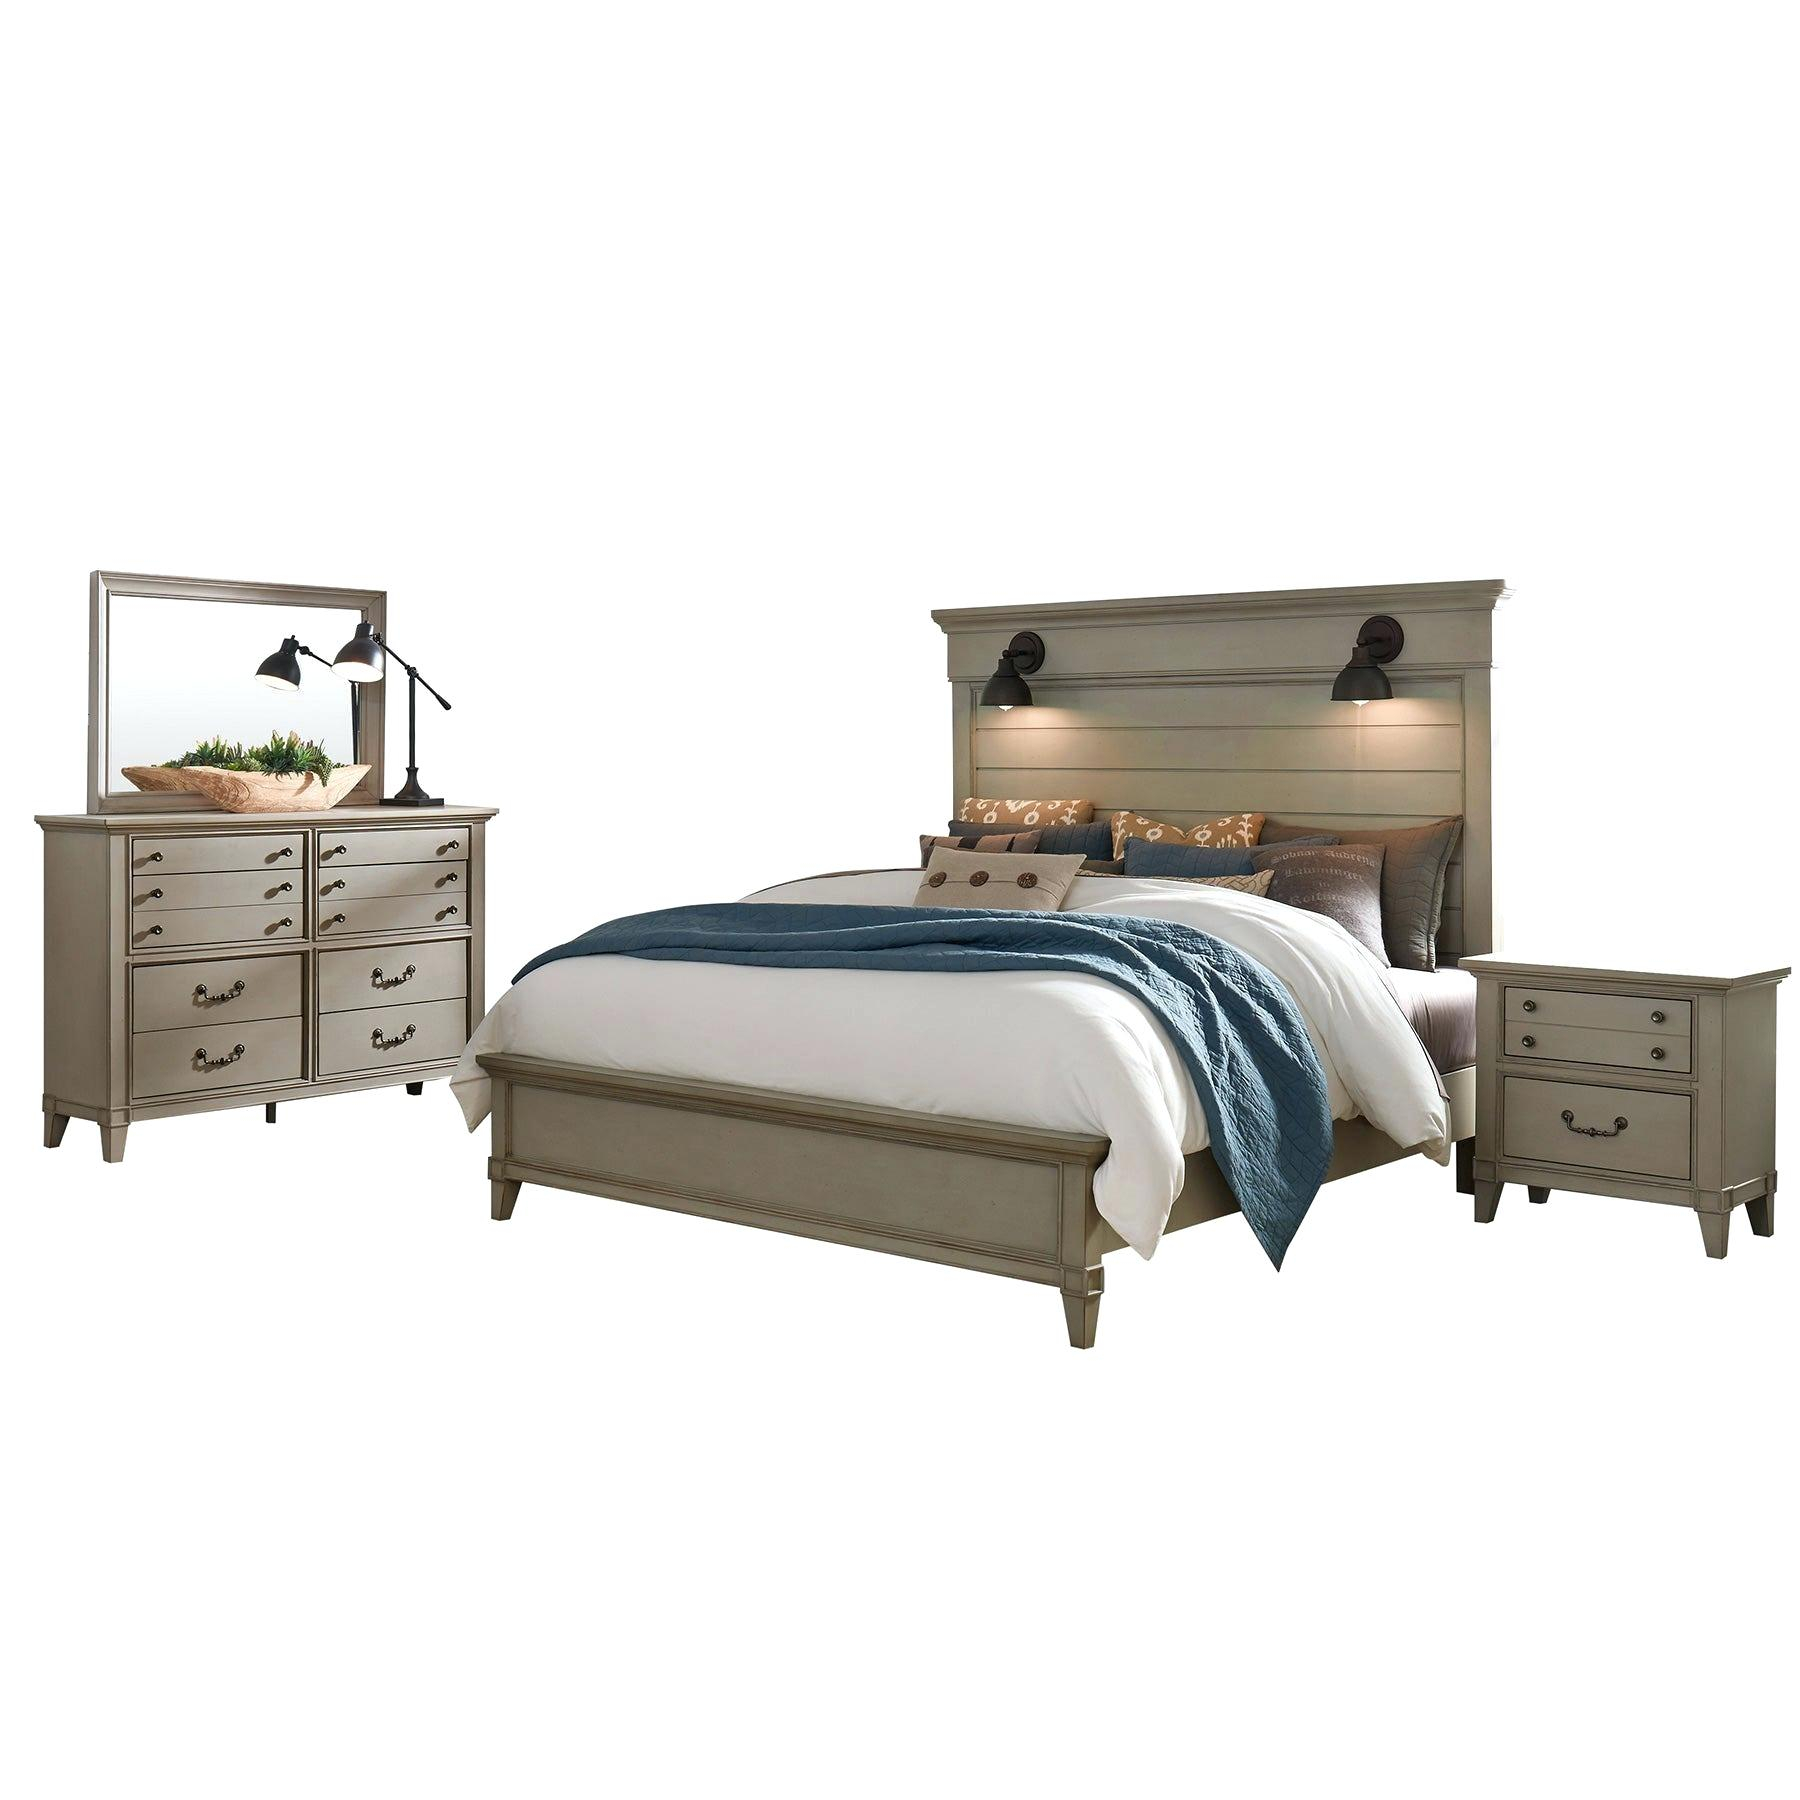 Lighted Bedroom Sets Remodelingcozyco intended for sizing 1800 X 1800